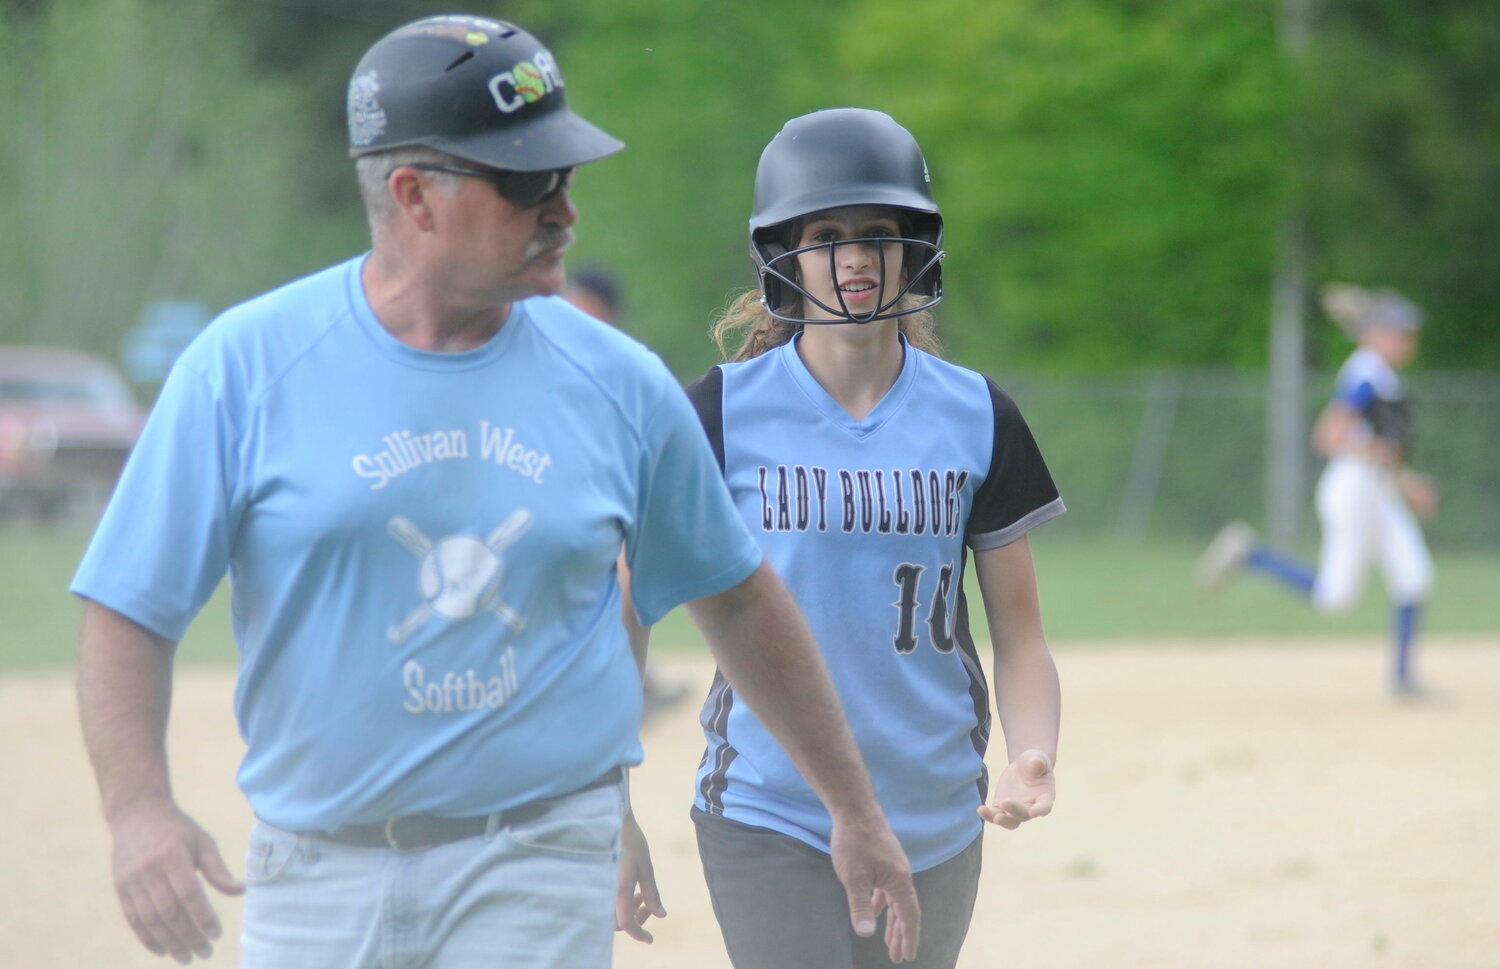 Coach and player. Sullivan West’s Anthony Durkin, veteran softball coach, foreground; and Gracyn Halloran.